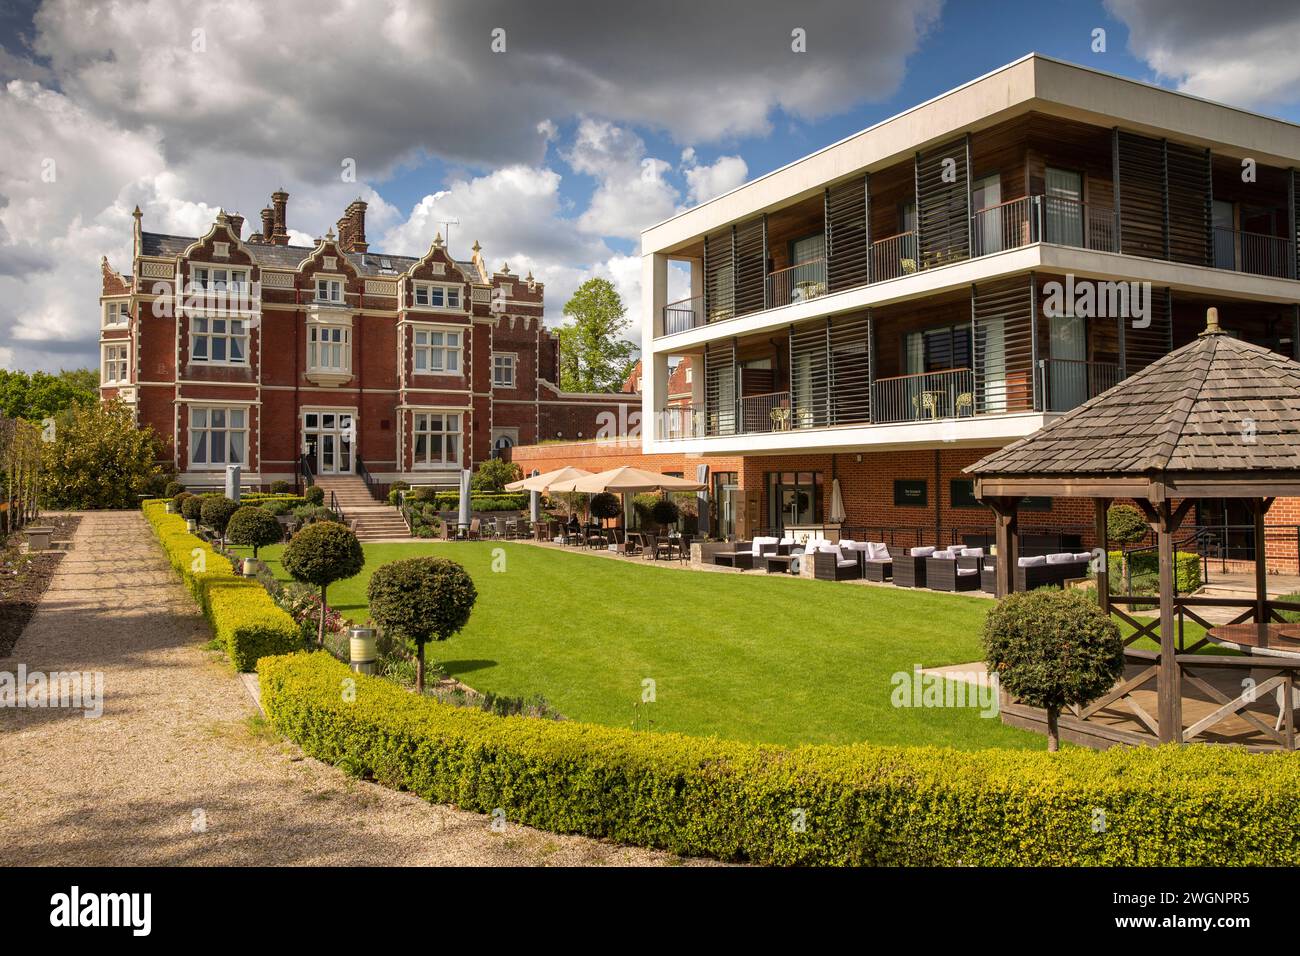 UK, England, Essex, Colchester, University of Essex, Wivenhoe House Hotel, old and new buildings Stock Photo